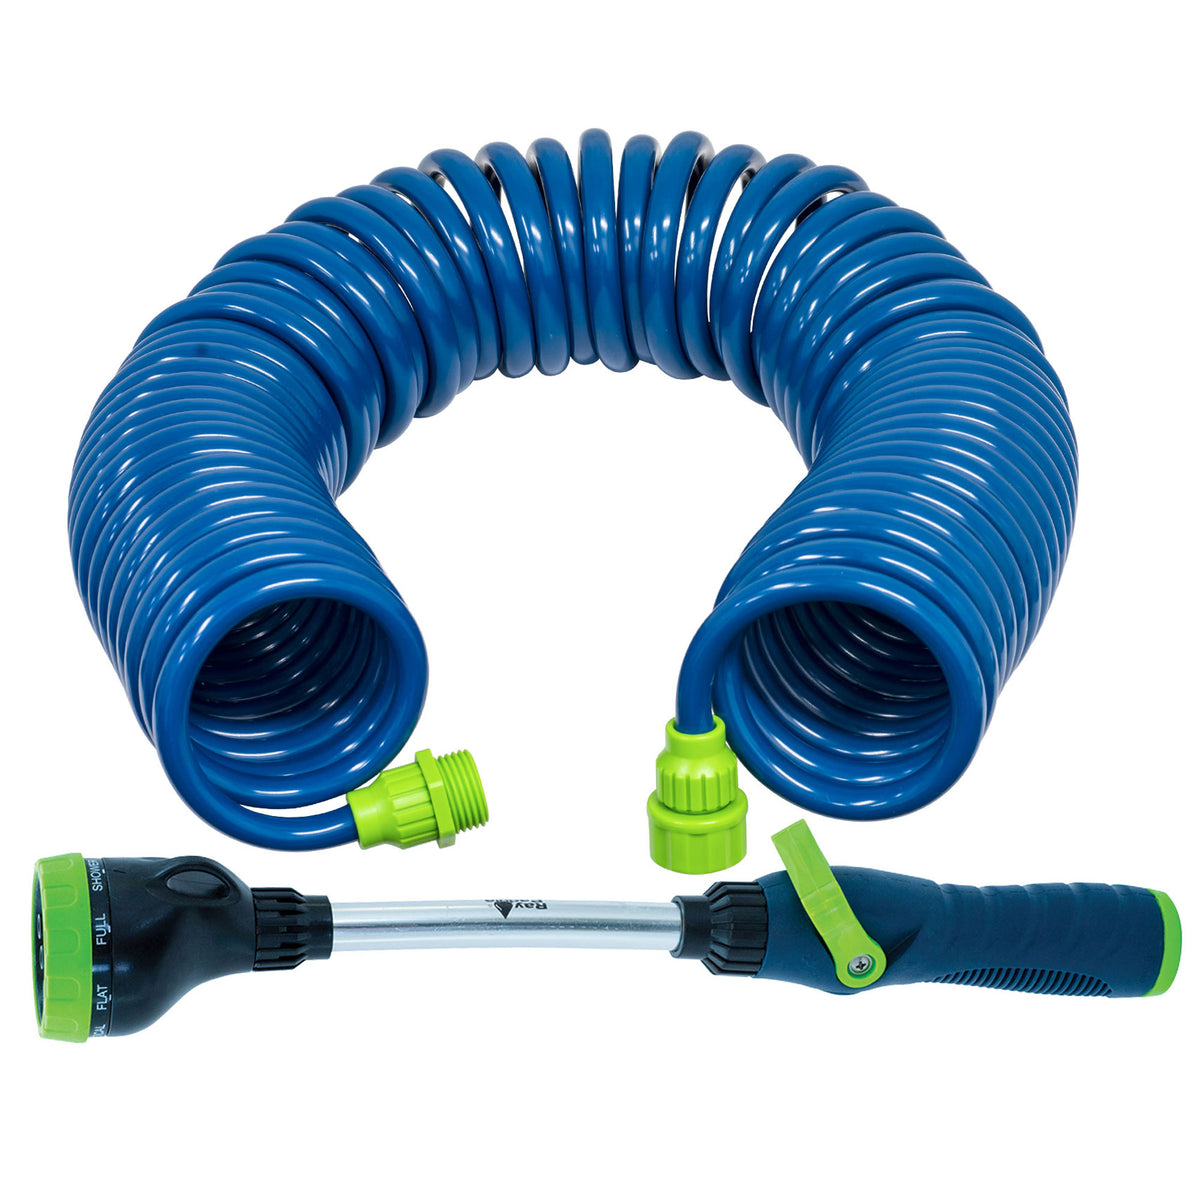 Flat Out Water Hose, Drinking Water 15m